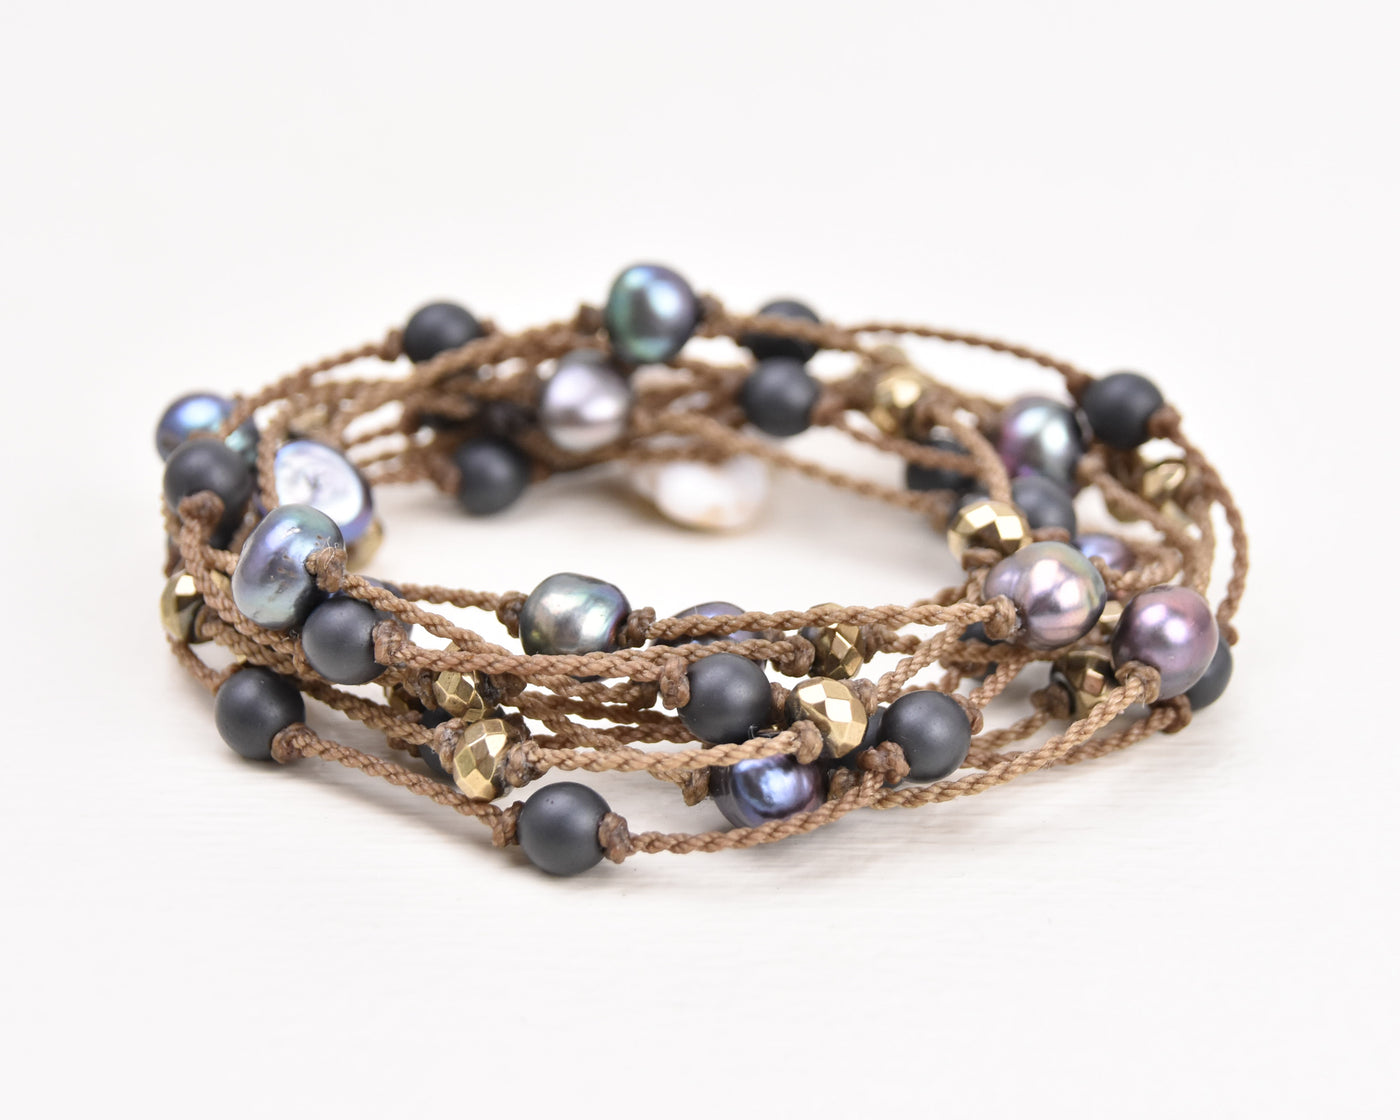 Night Fall - Wrap Stack (20% Off)